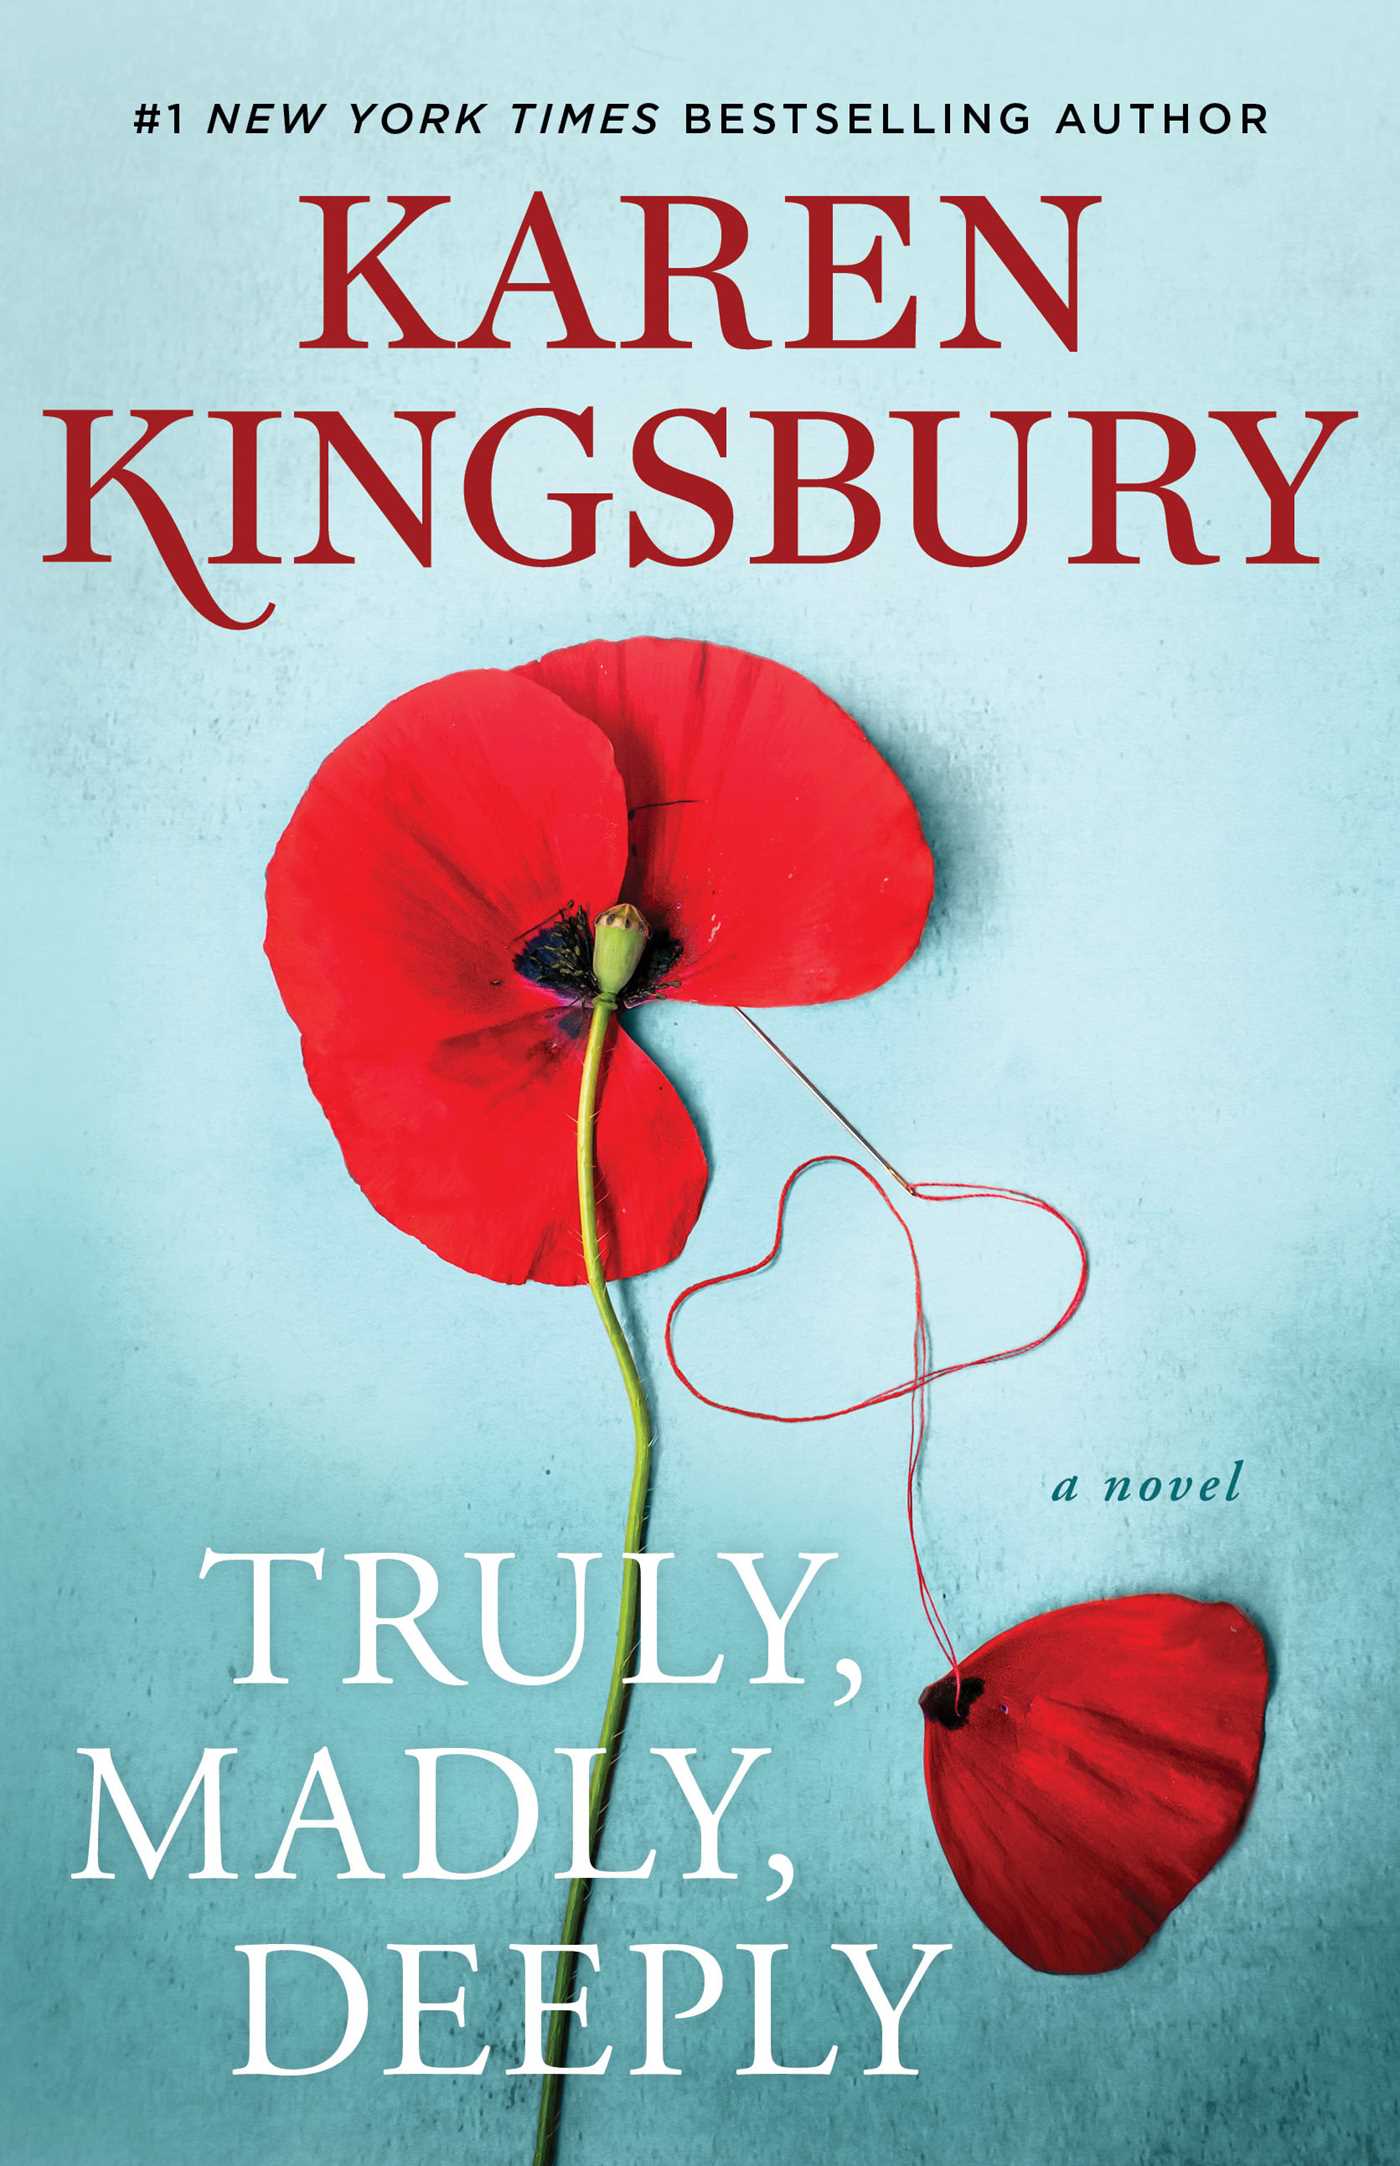 When Will Truly, Madly, Deeply (The Baxters 31) By Karen Kingsbury Come